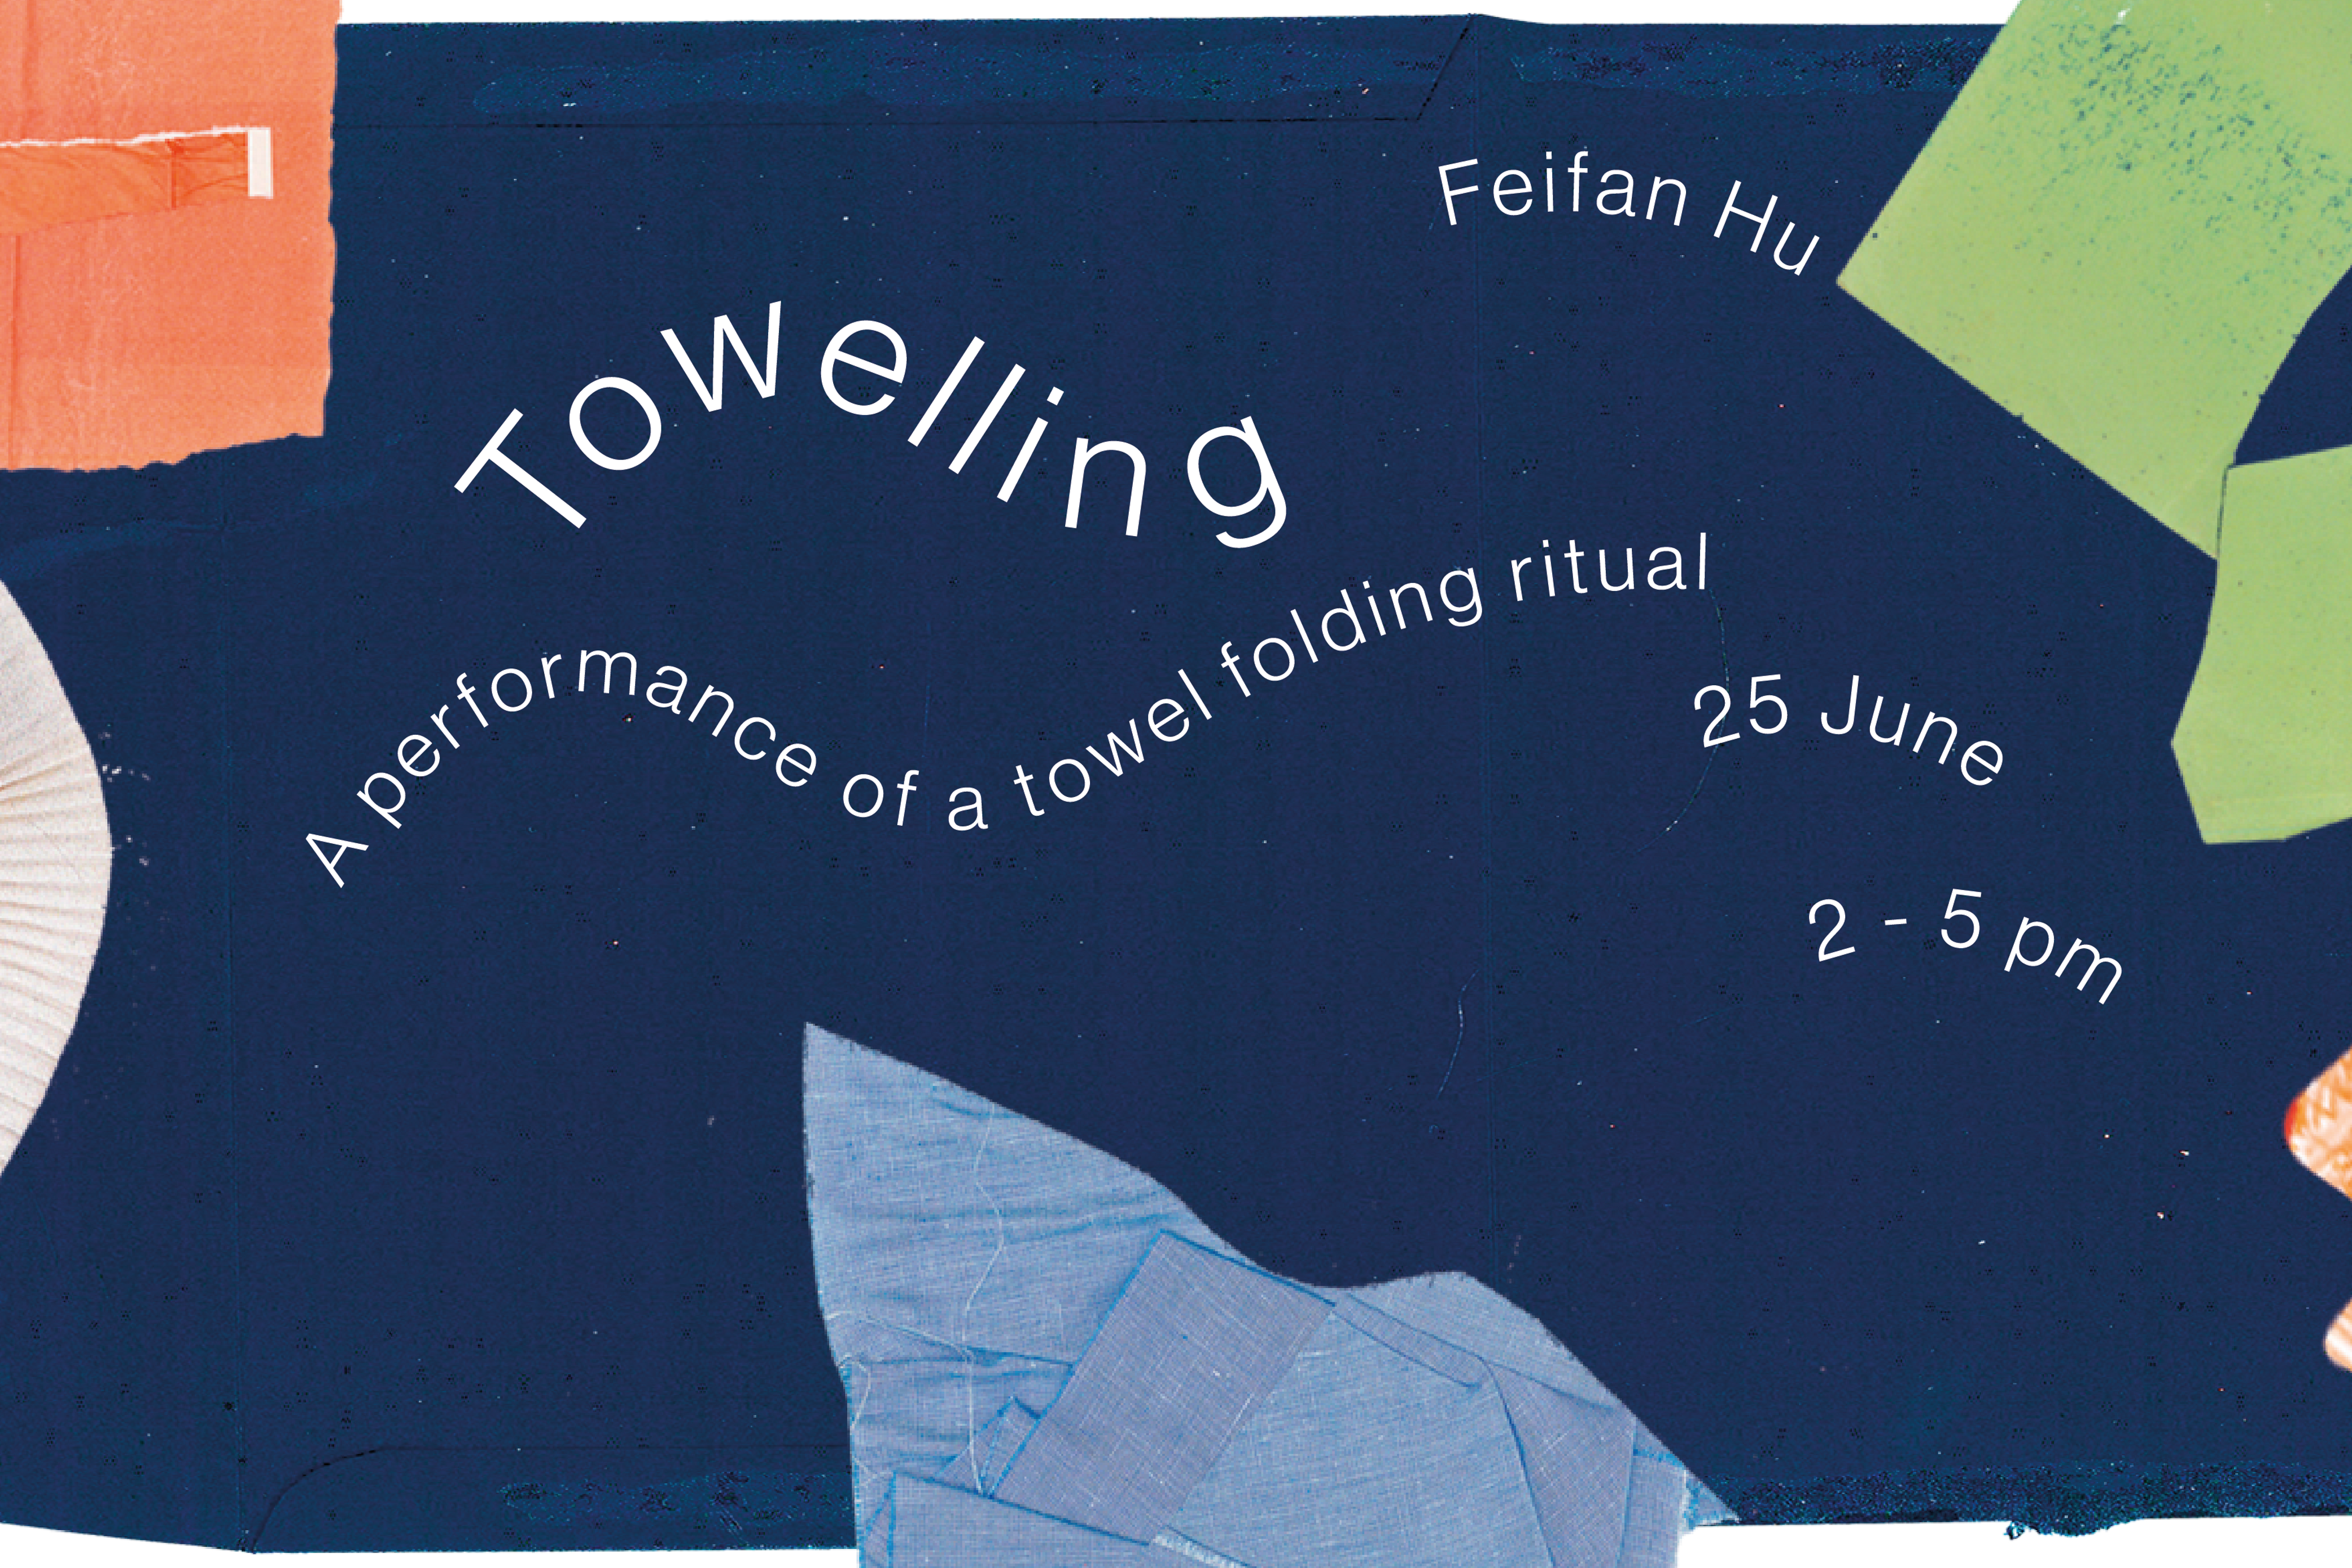 A graphic of fabrics scraps, bordering a navy blue fabric background with wavy lines of text reading ‘Towelling. Feifan Hu. A performance of a towel folding ritual, 25th of June, 2 to 5pm’